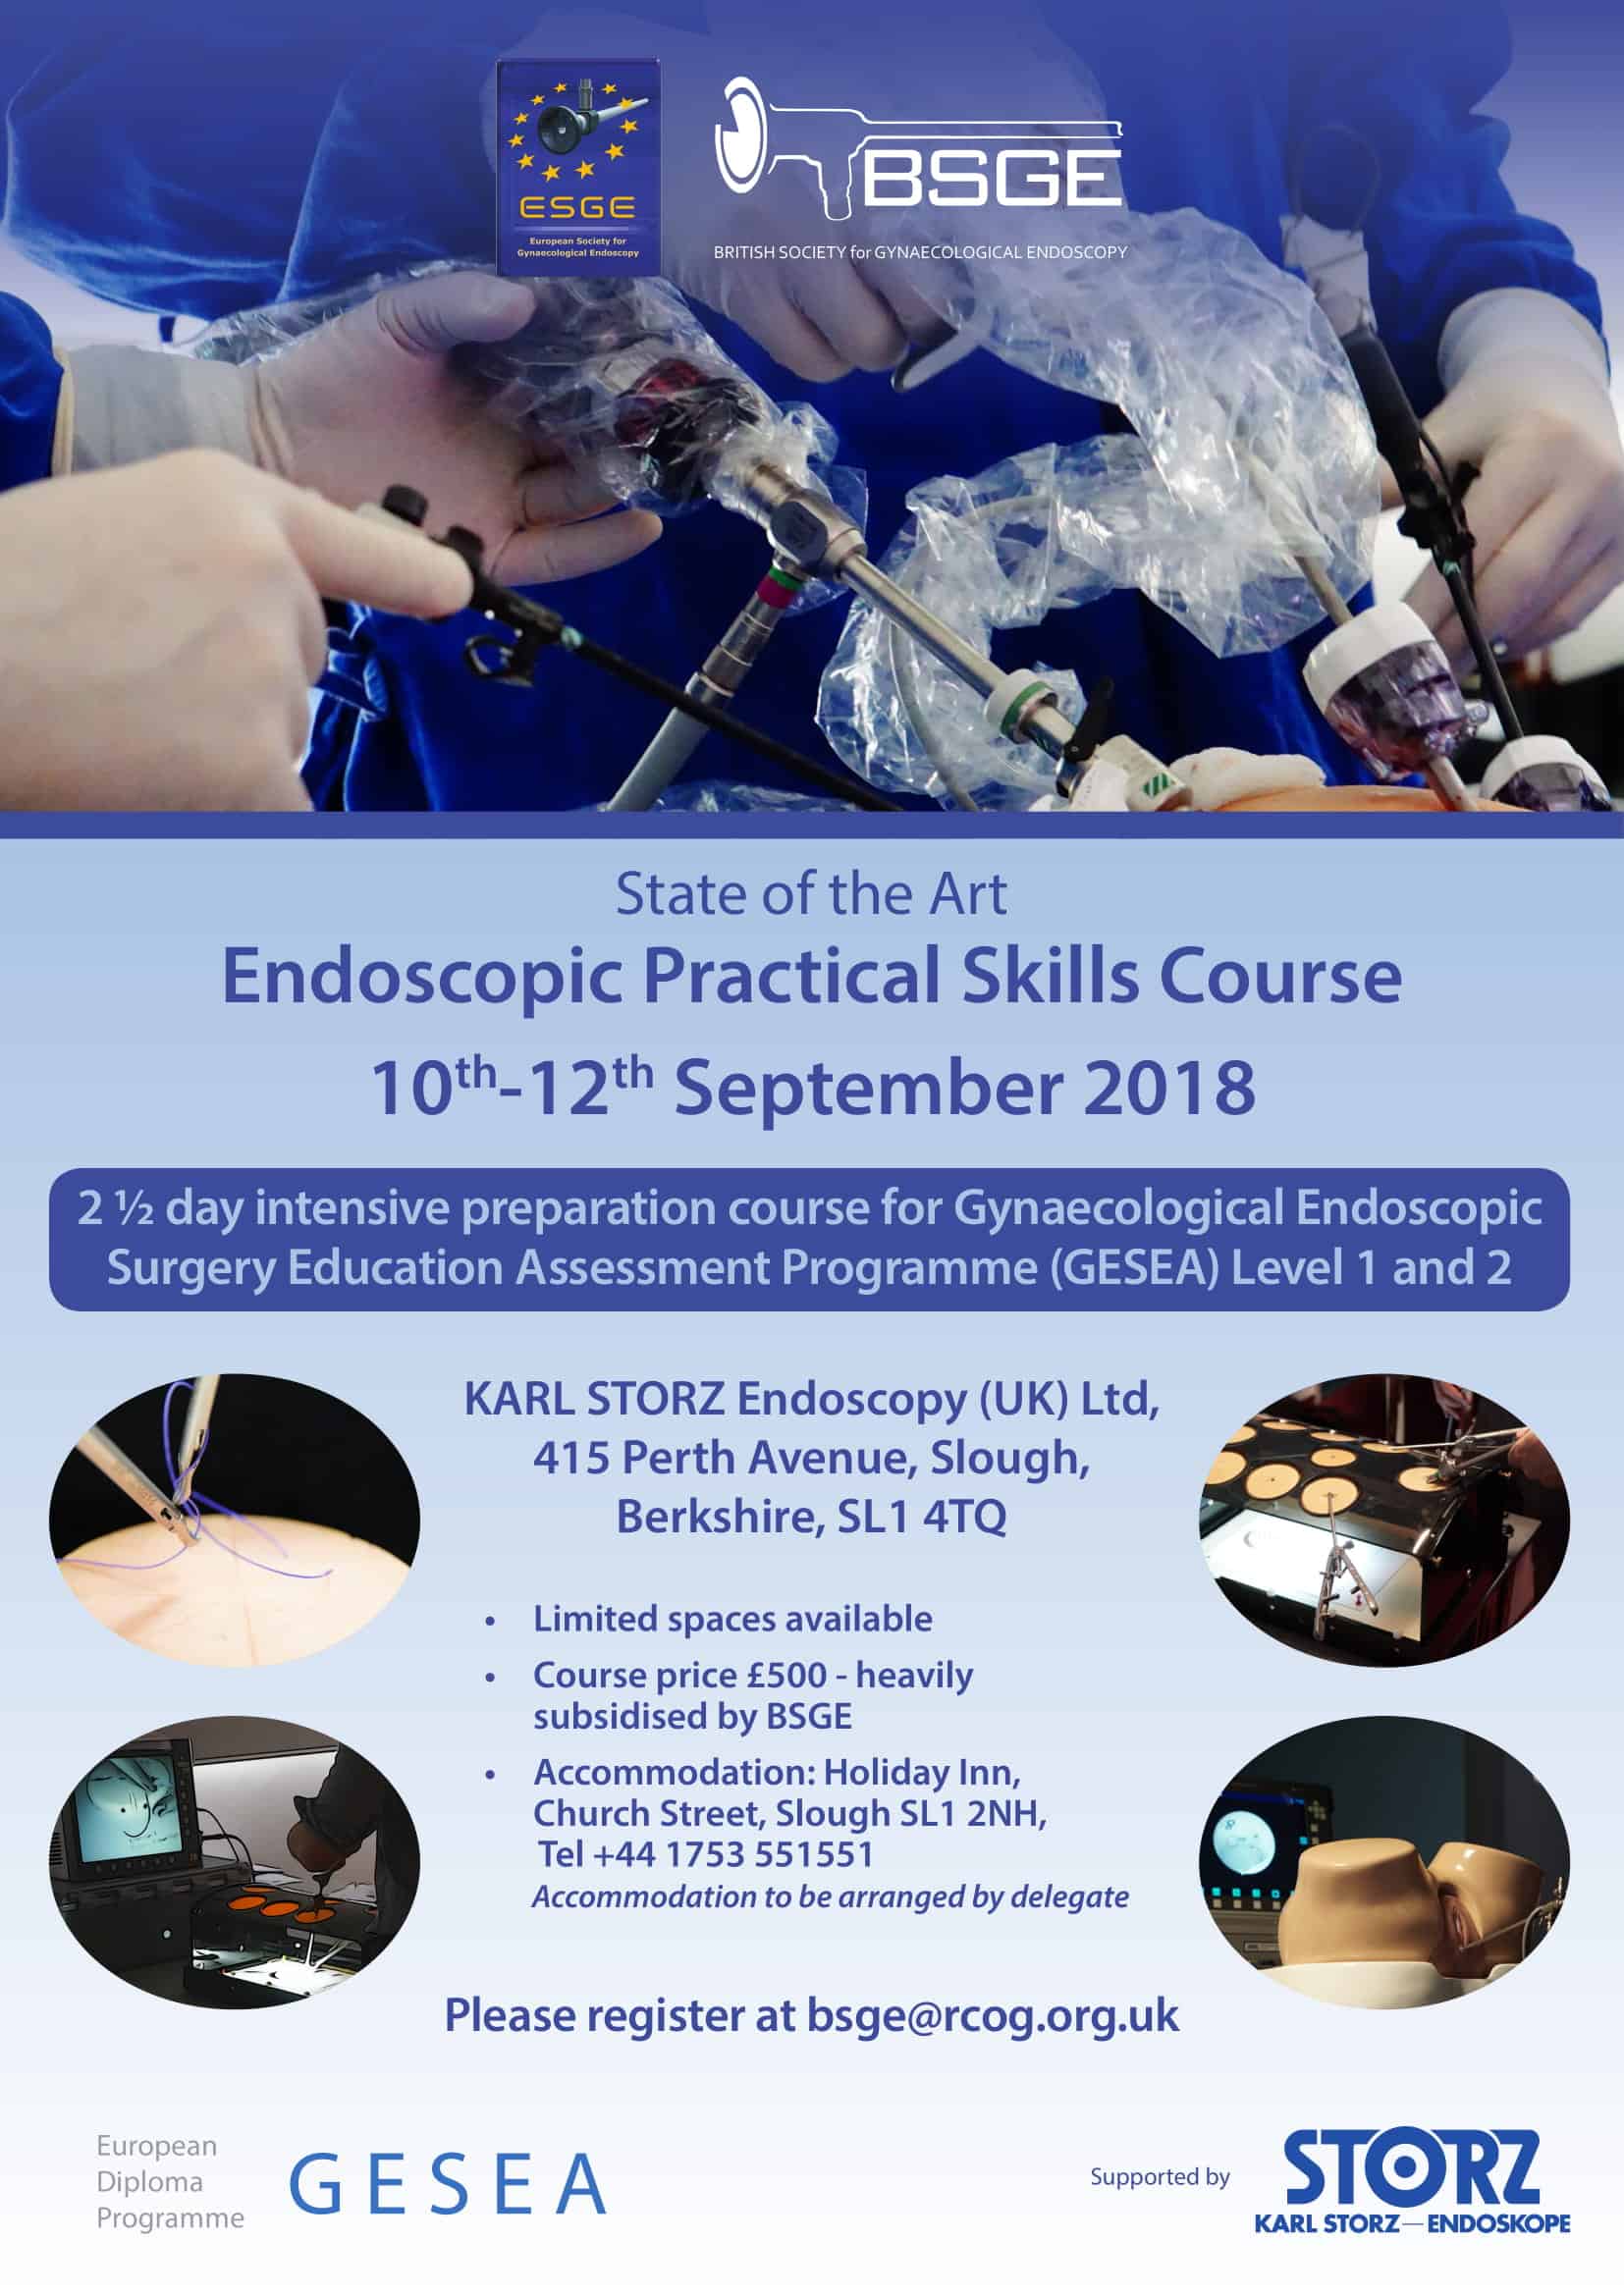 State-of-the-art endoscopic practical skills course